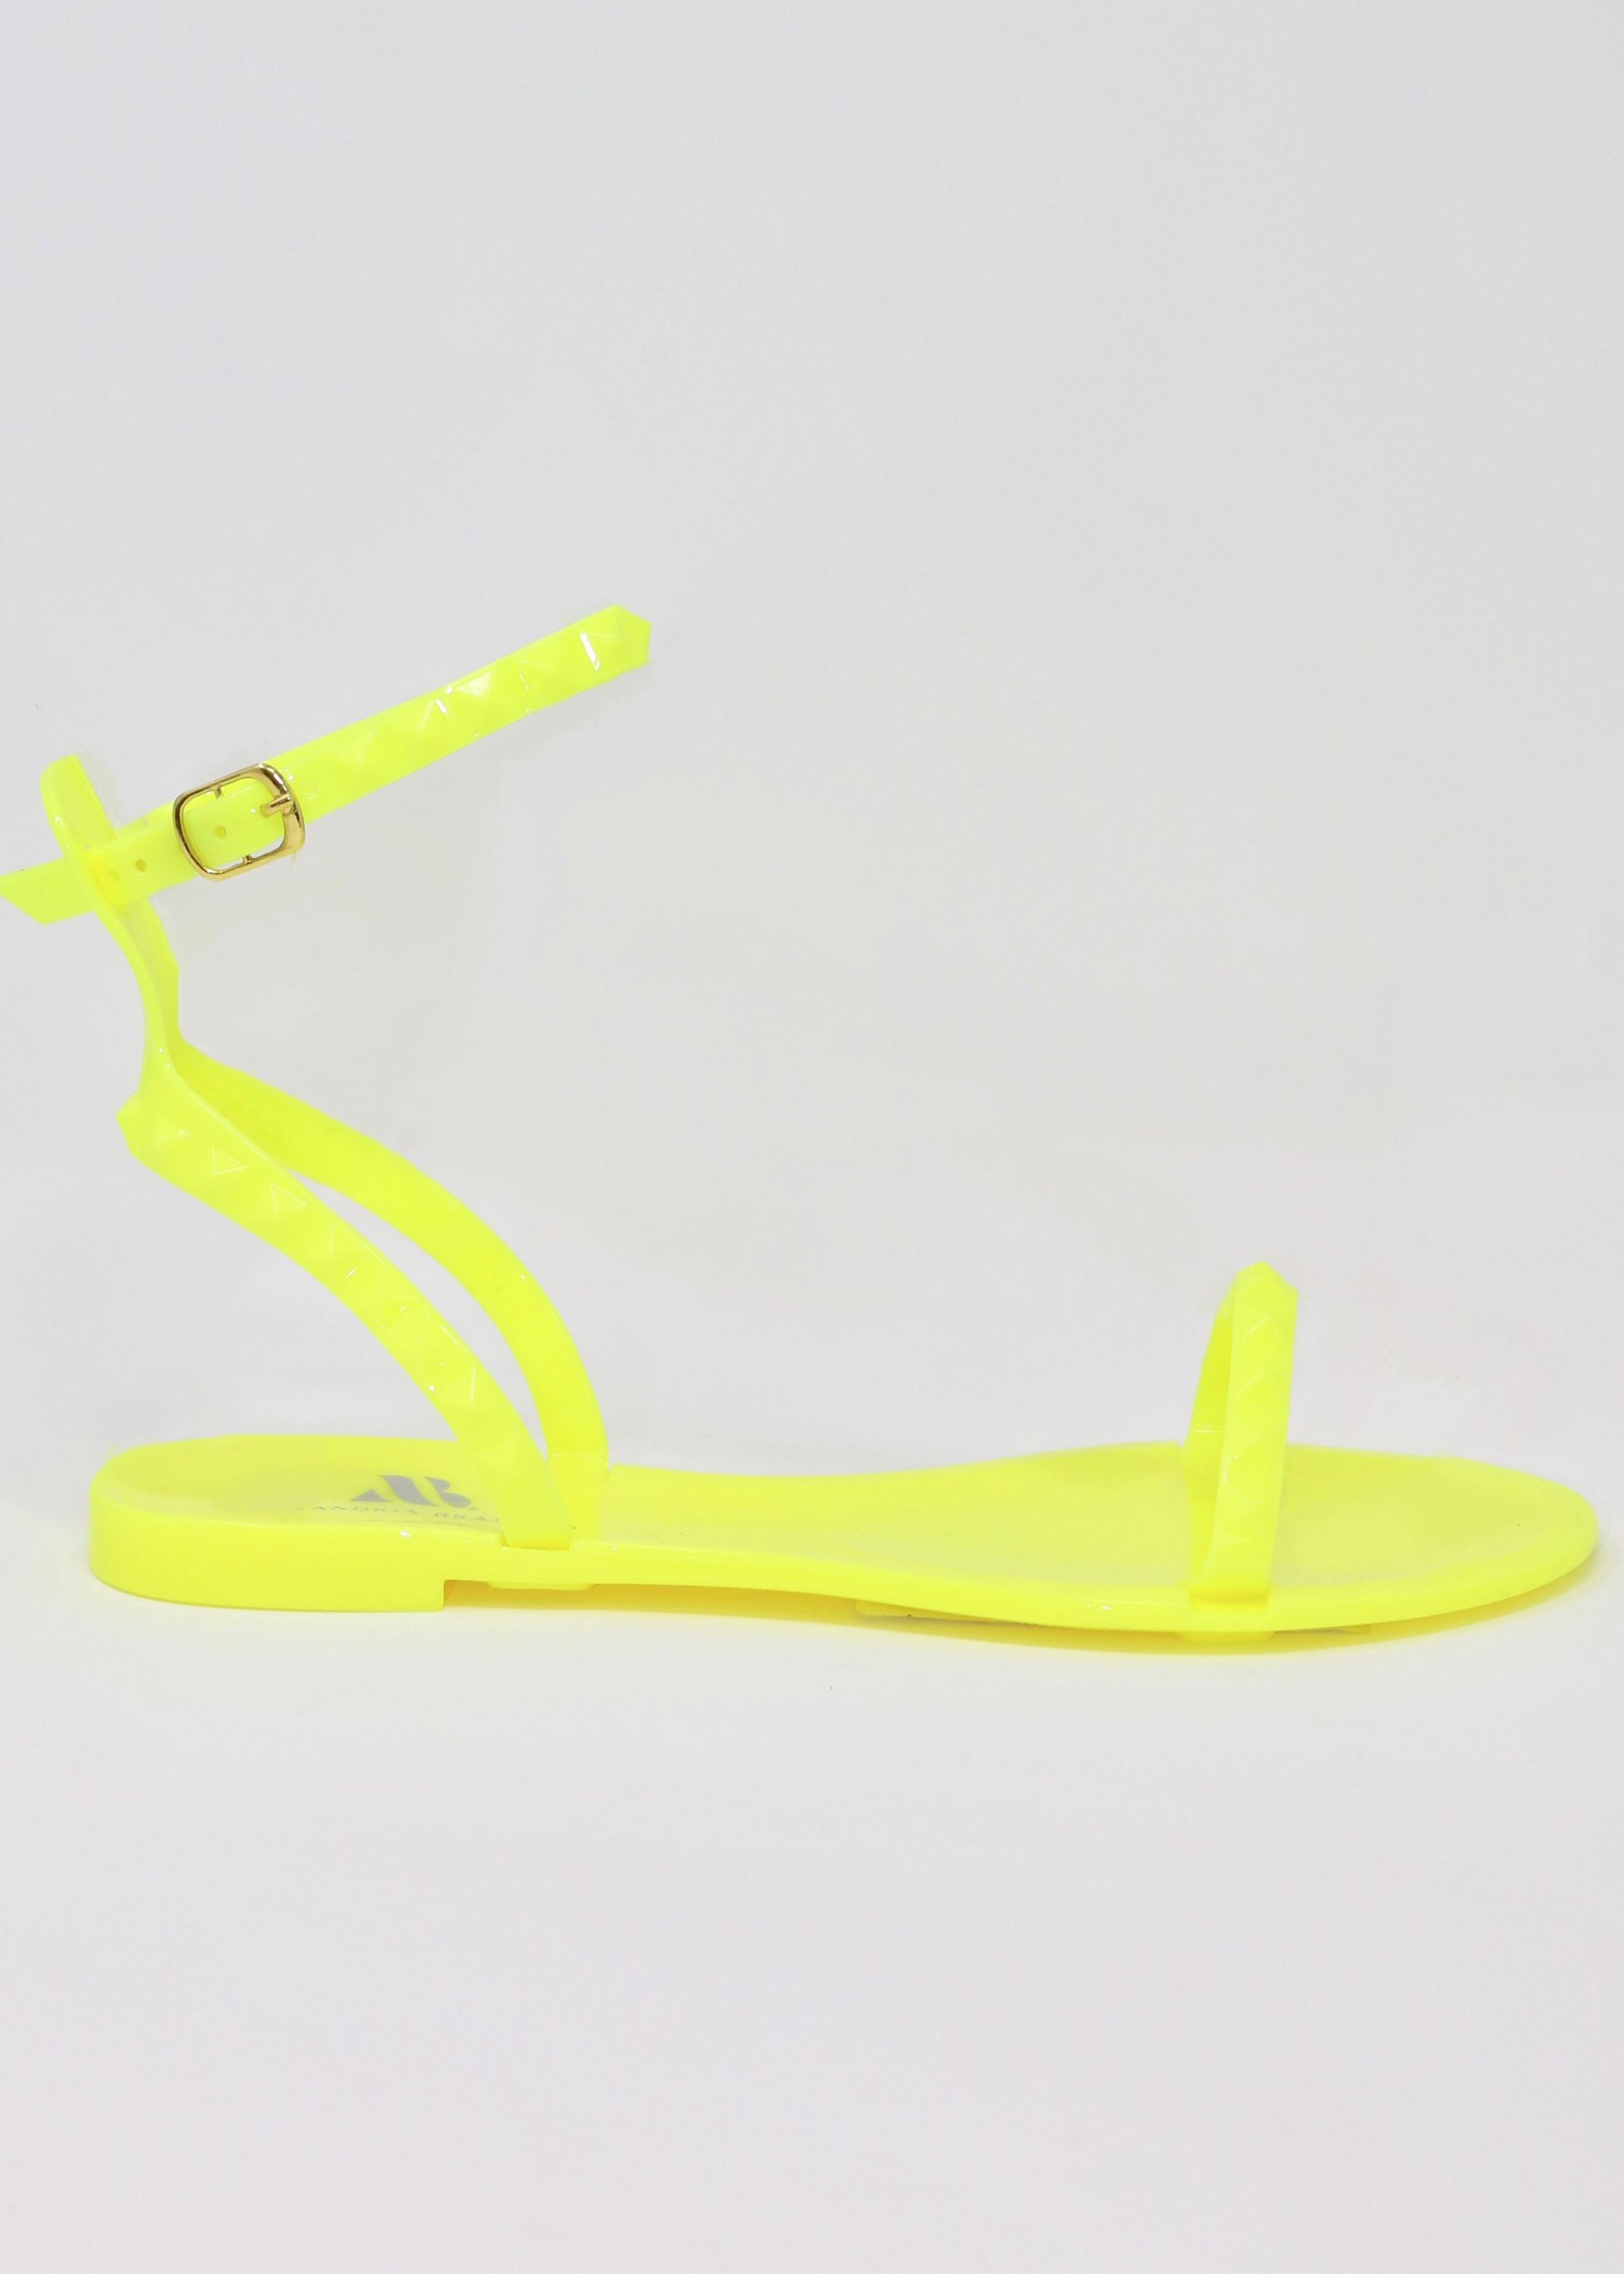 Women's Aria Neon yellow waterproof jelly sandals by Alexandria Brandao shoes. Side View